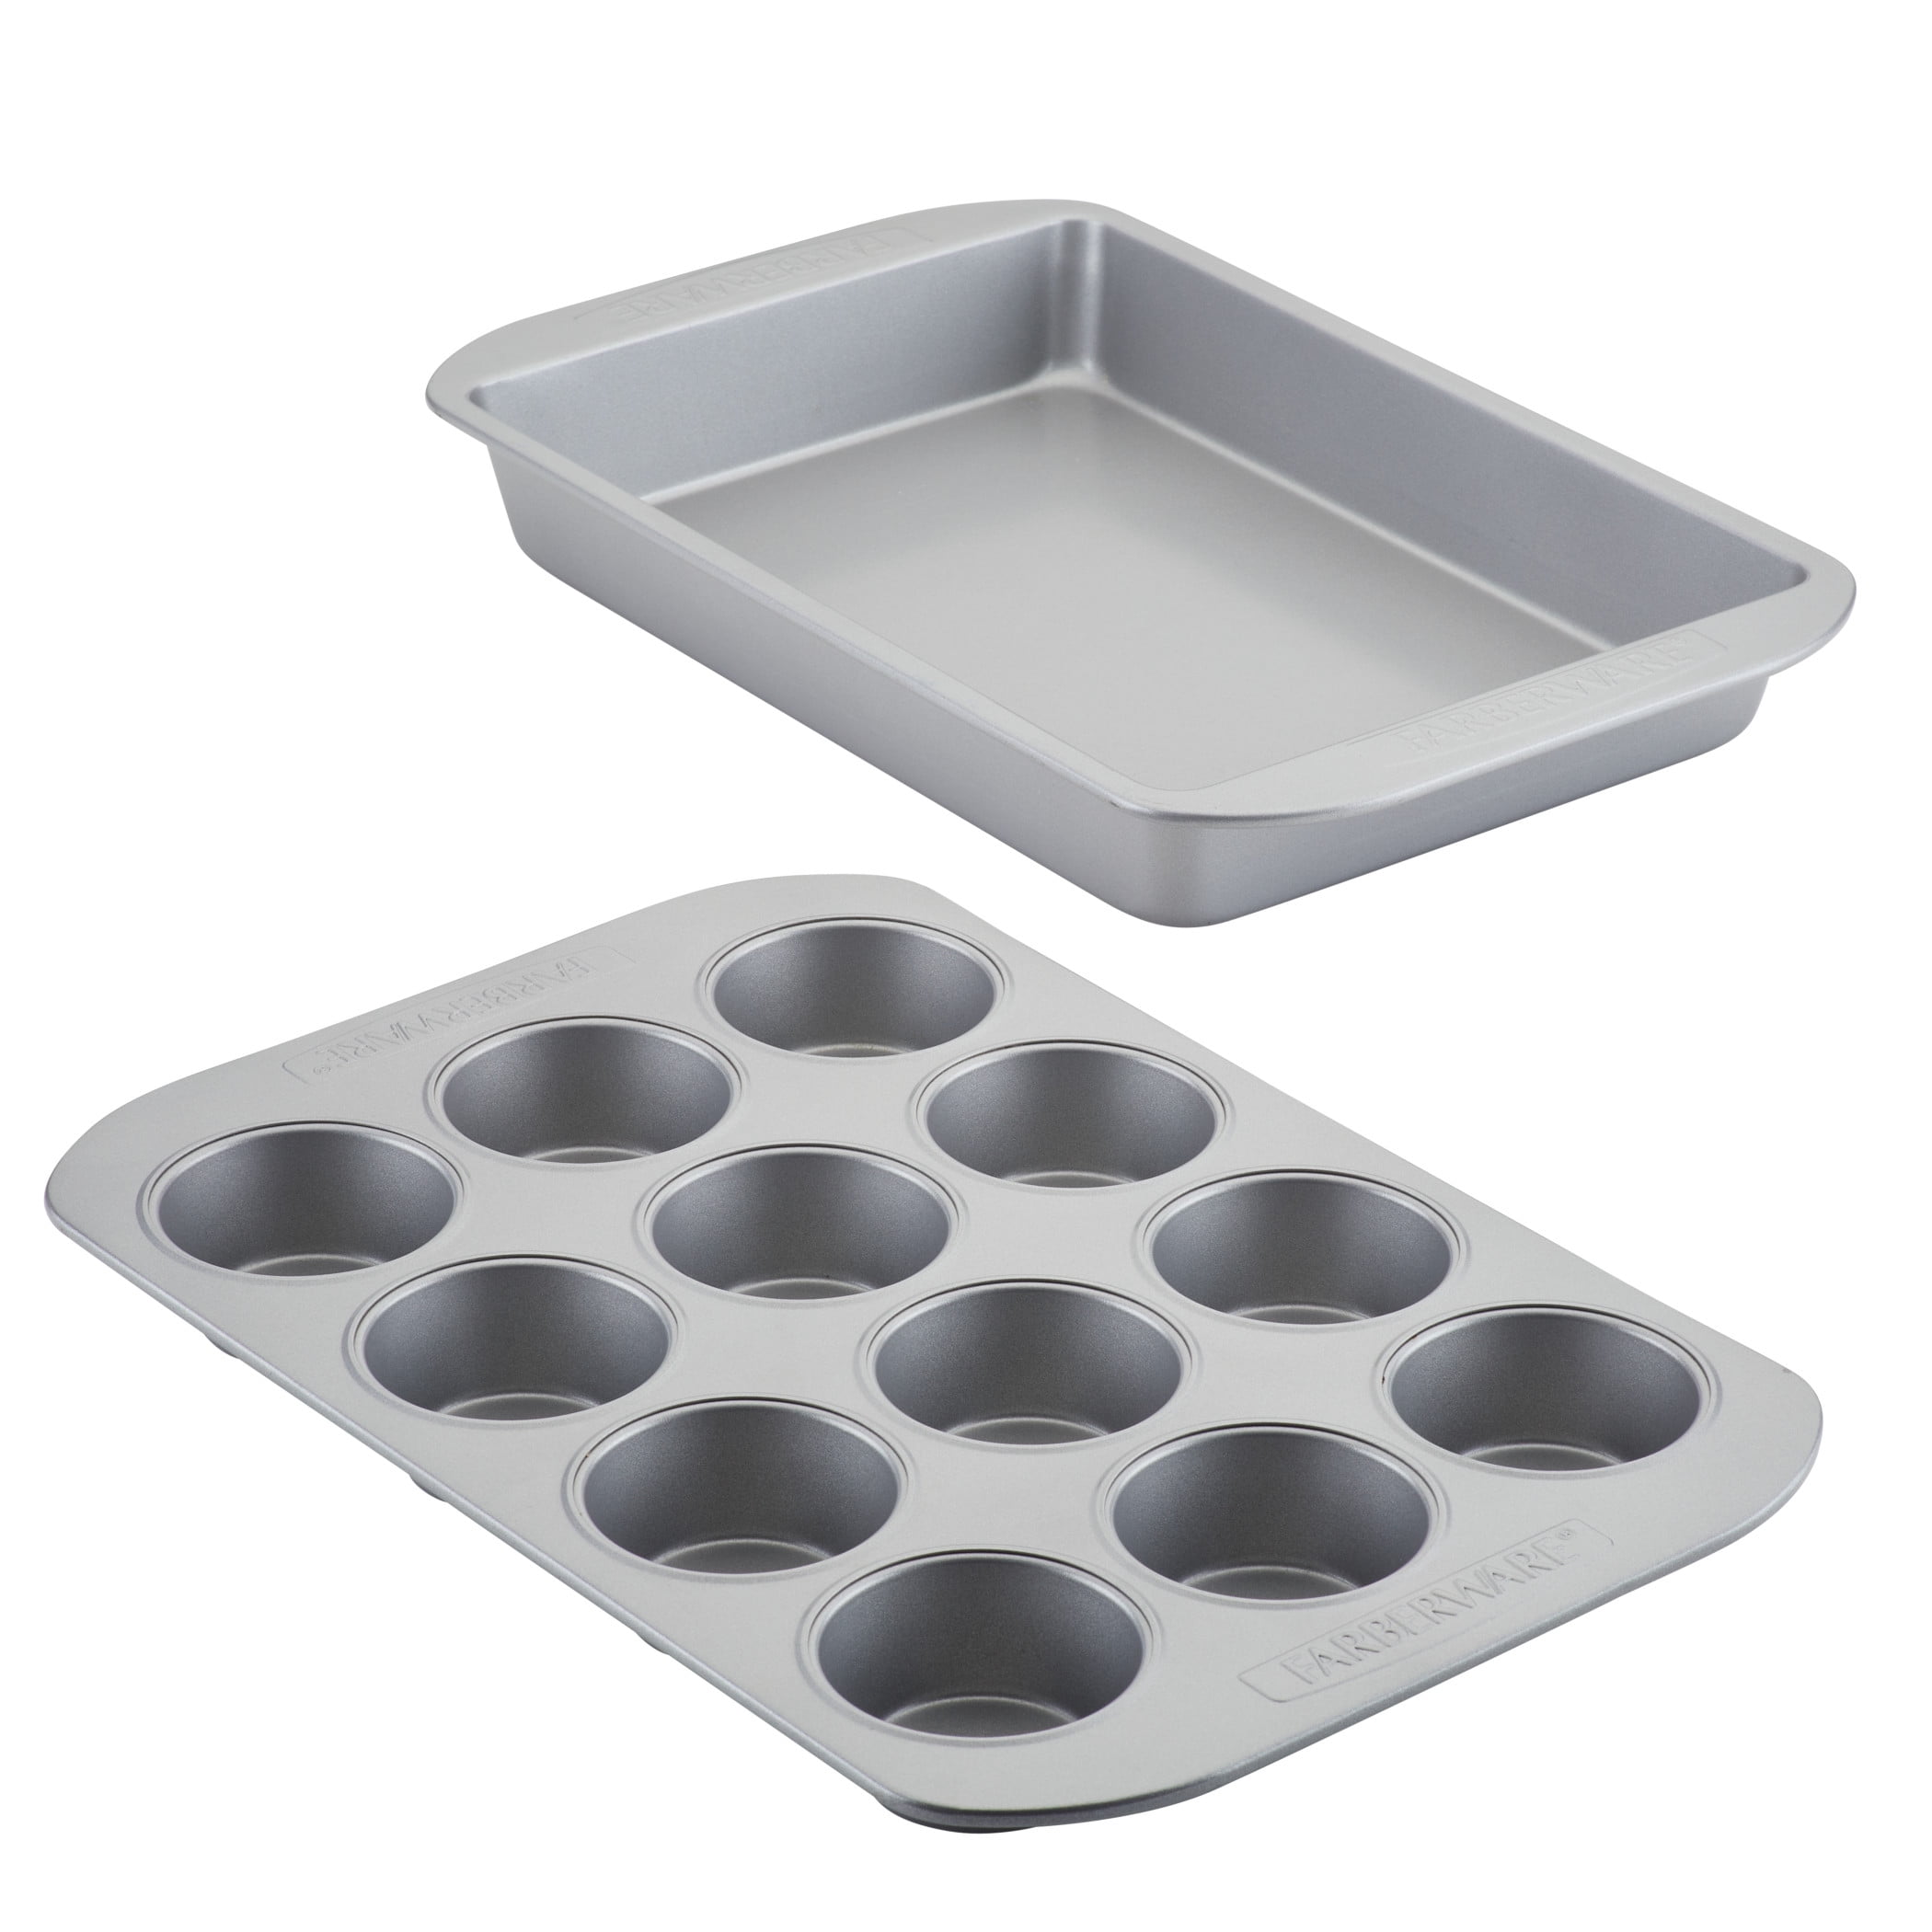 Silicone Bakeware Set Cake Muffin Molds For Nonstick Baking Pans Tray 40 Pieces 